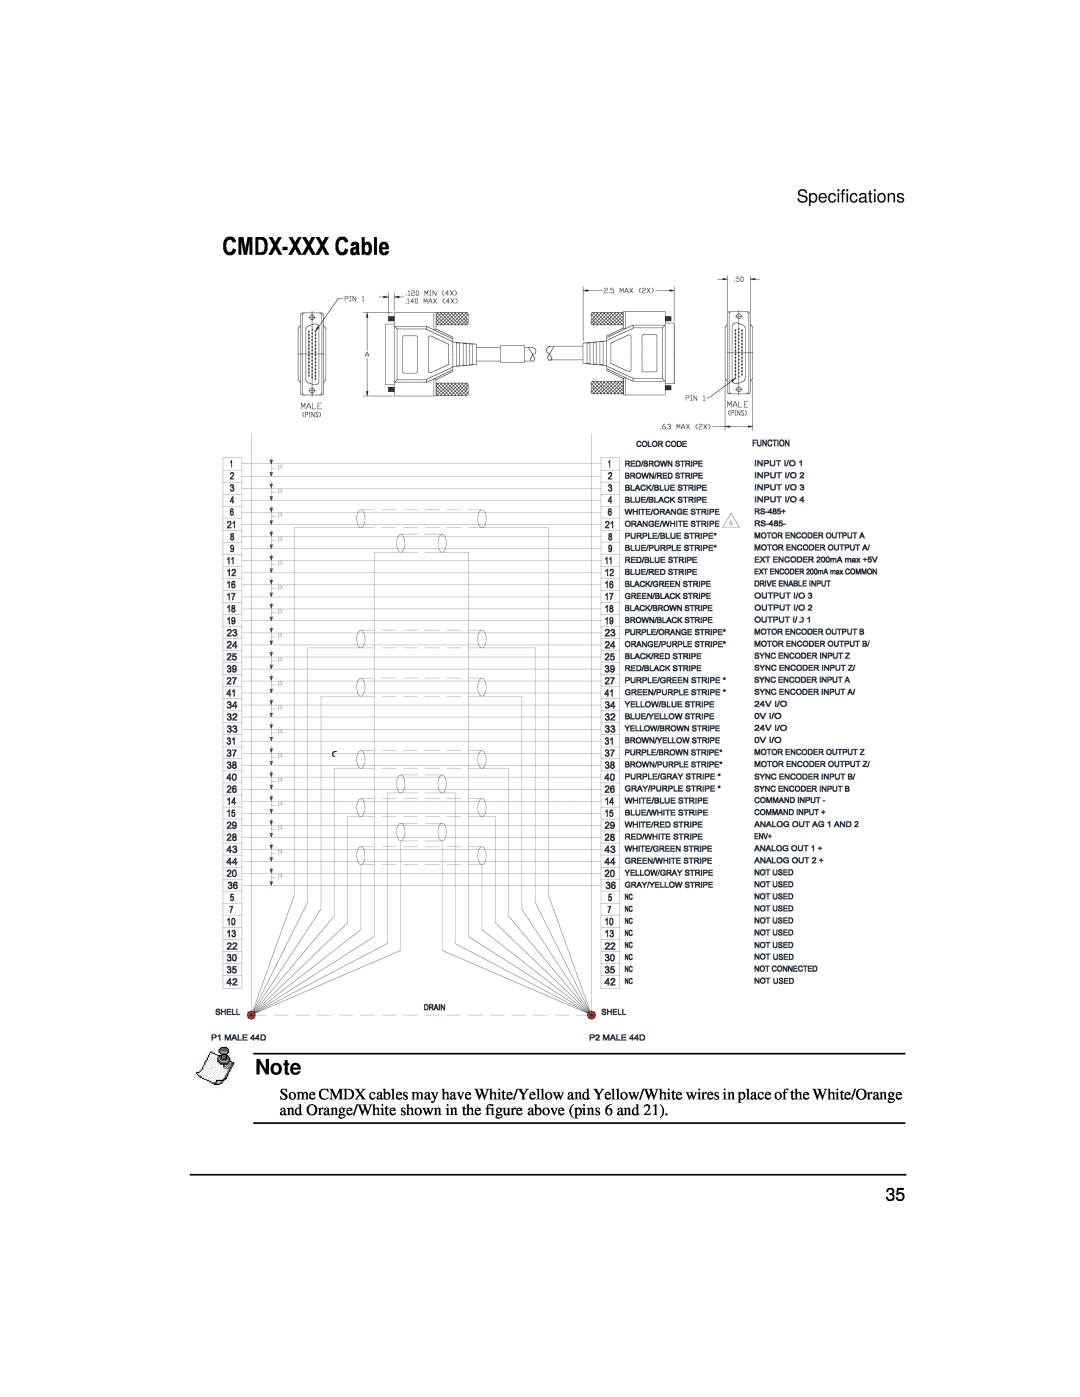 Emerson 400508-02 installation manual CMDX-XXX Cable, Specifications 